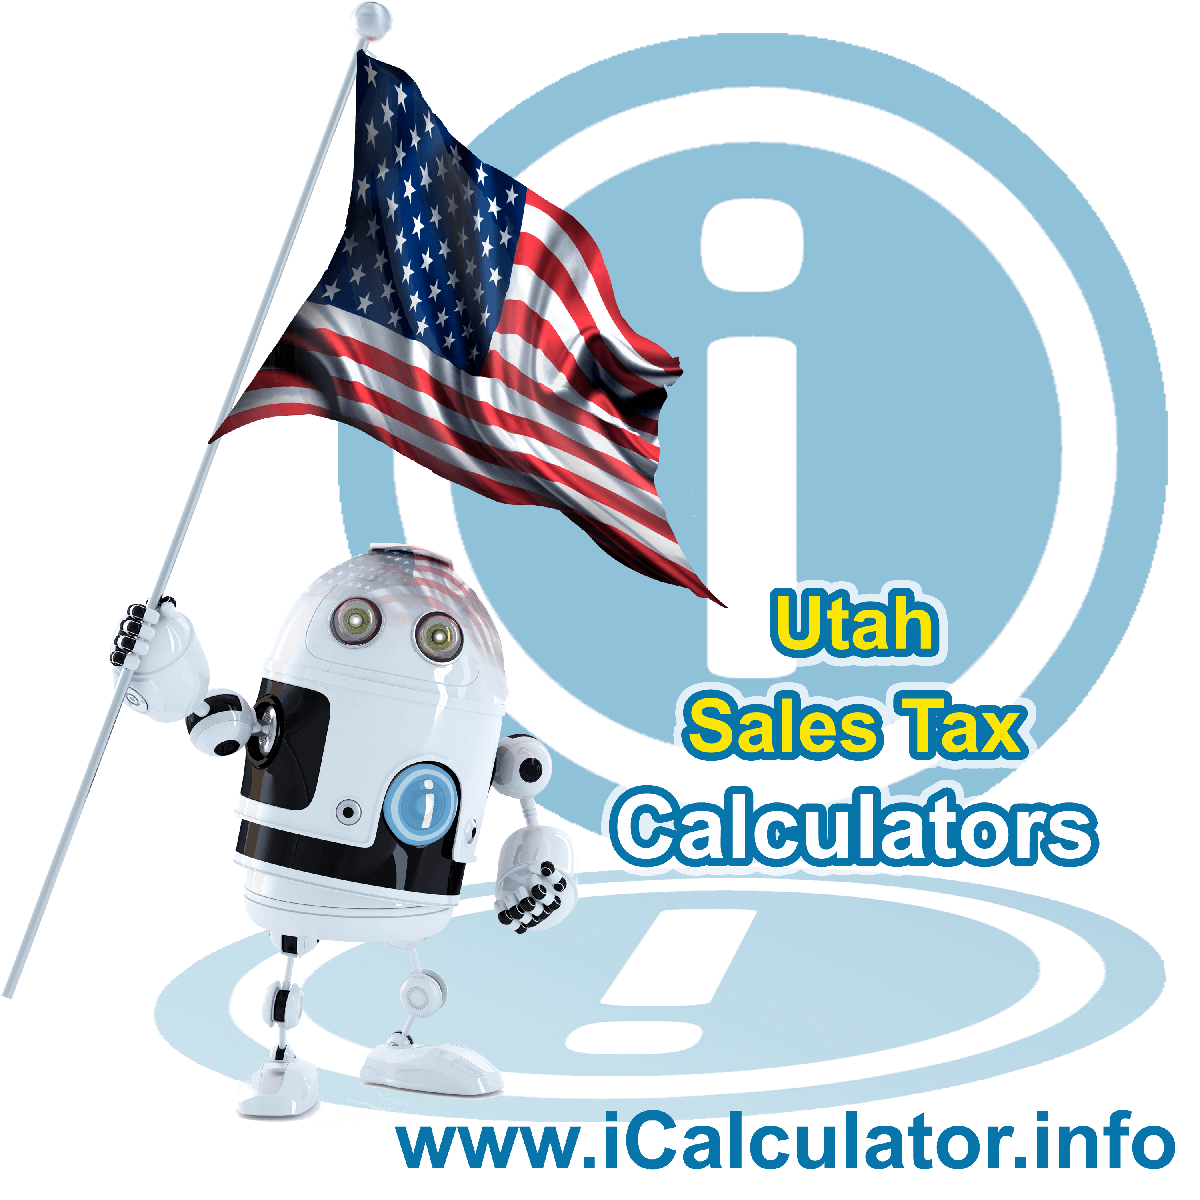 Heber Sales Rates: This image illustrates a calculator robot calculating Heber sales tax manually using the Heber Sales Tax Formula. You can use this information to calculate Heber Sales Tax manually or use the Heber Sales Tax Calculator to calculate sales tax online.